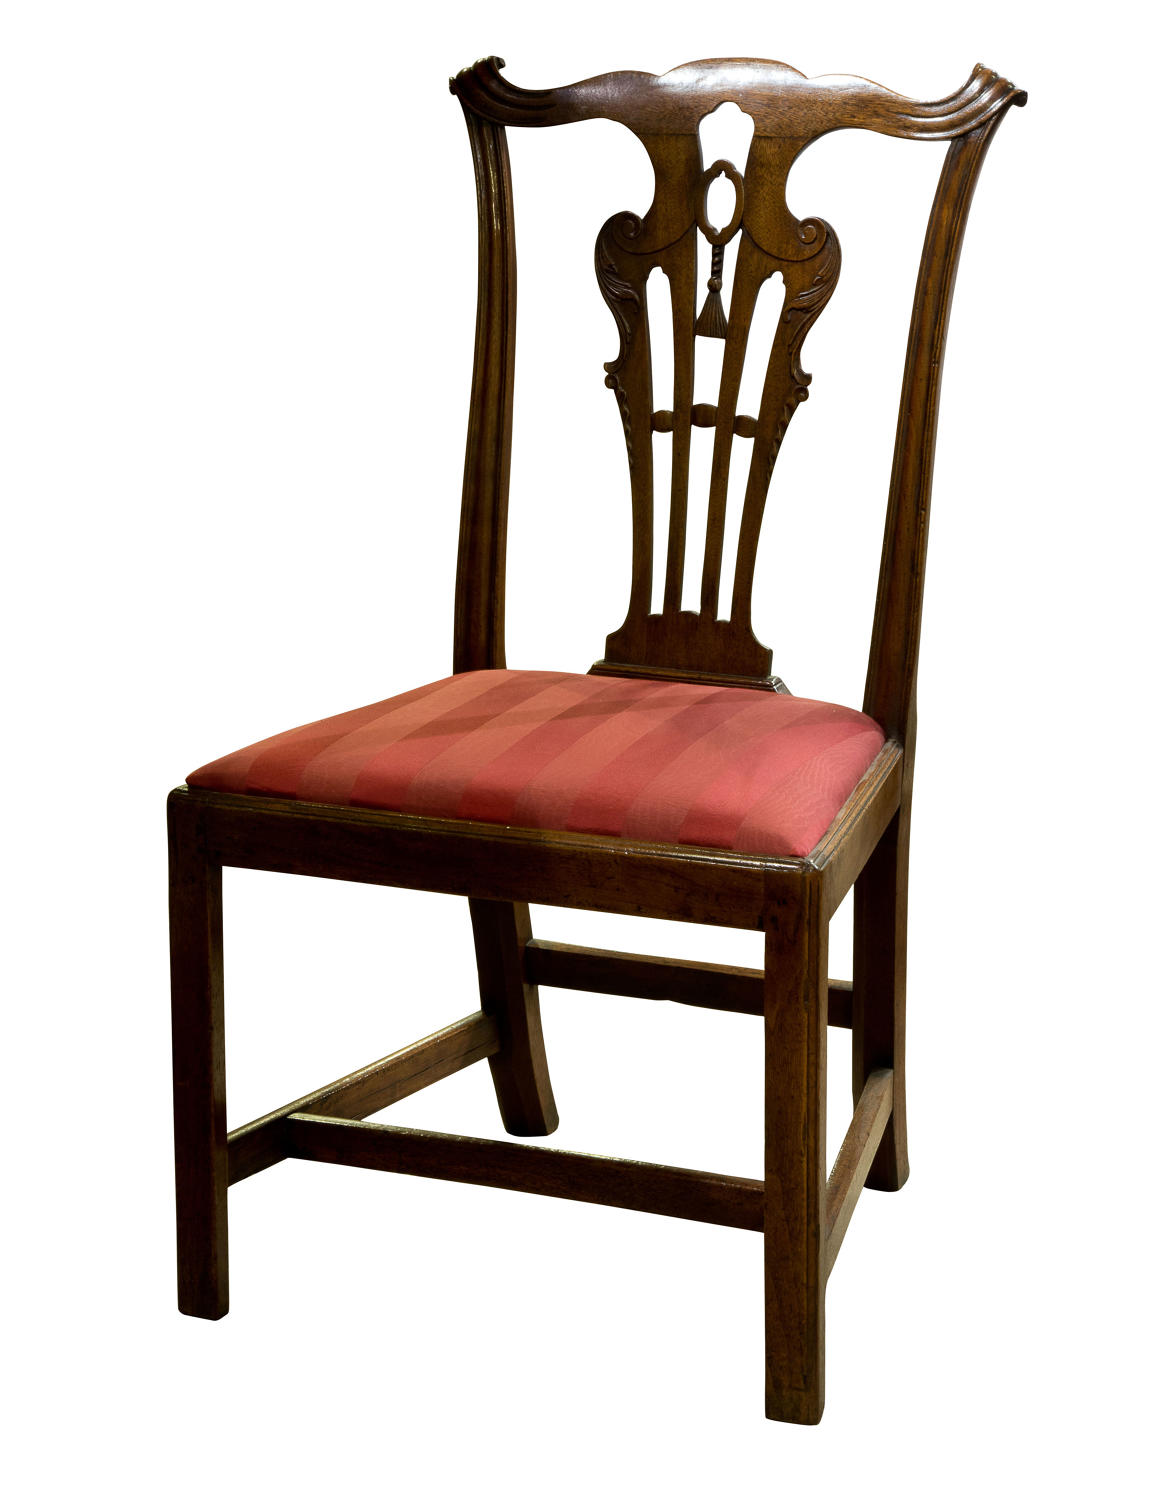 Early George III carved walnut standard chair in the manner of John Wh